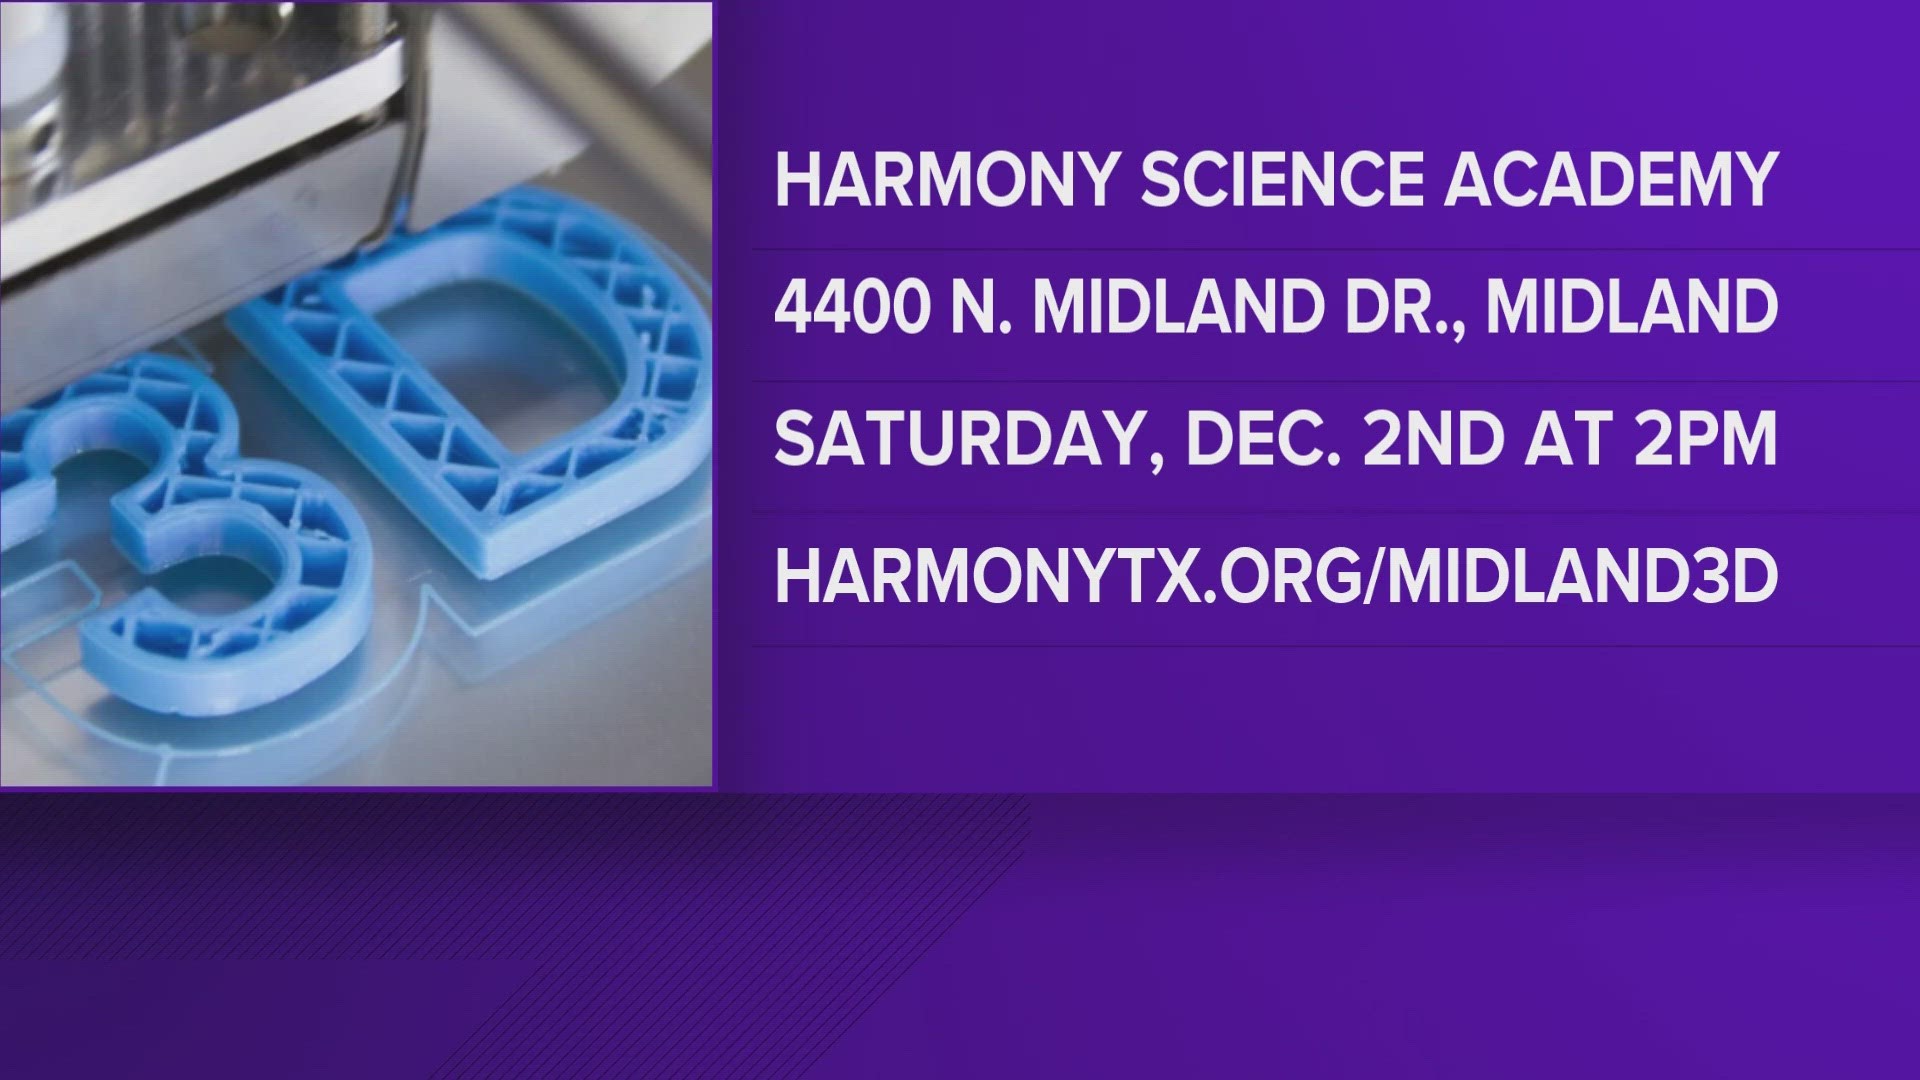 Harmony Science Academy-Midland is hosting the event on Dec. 2 at 2 p.m. at its Midland admission office.